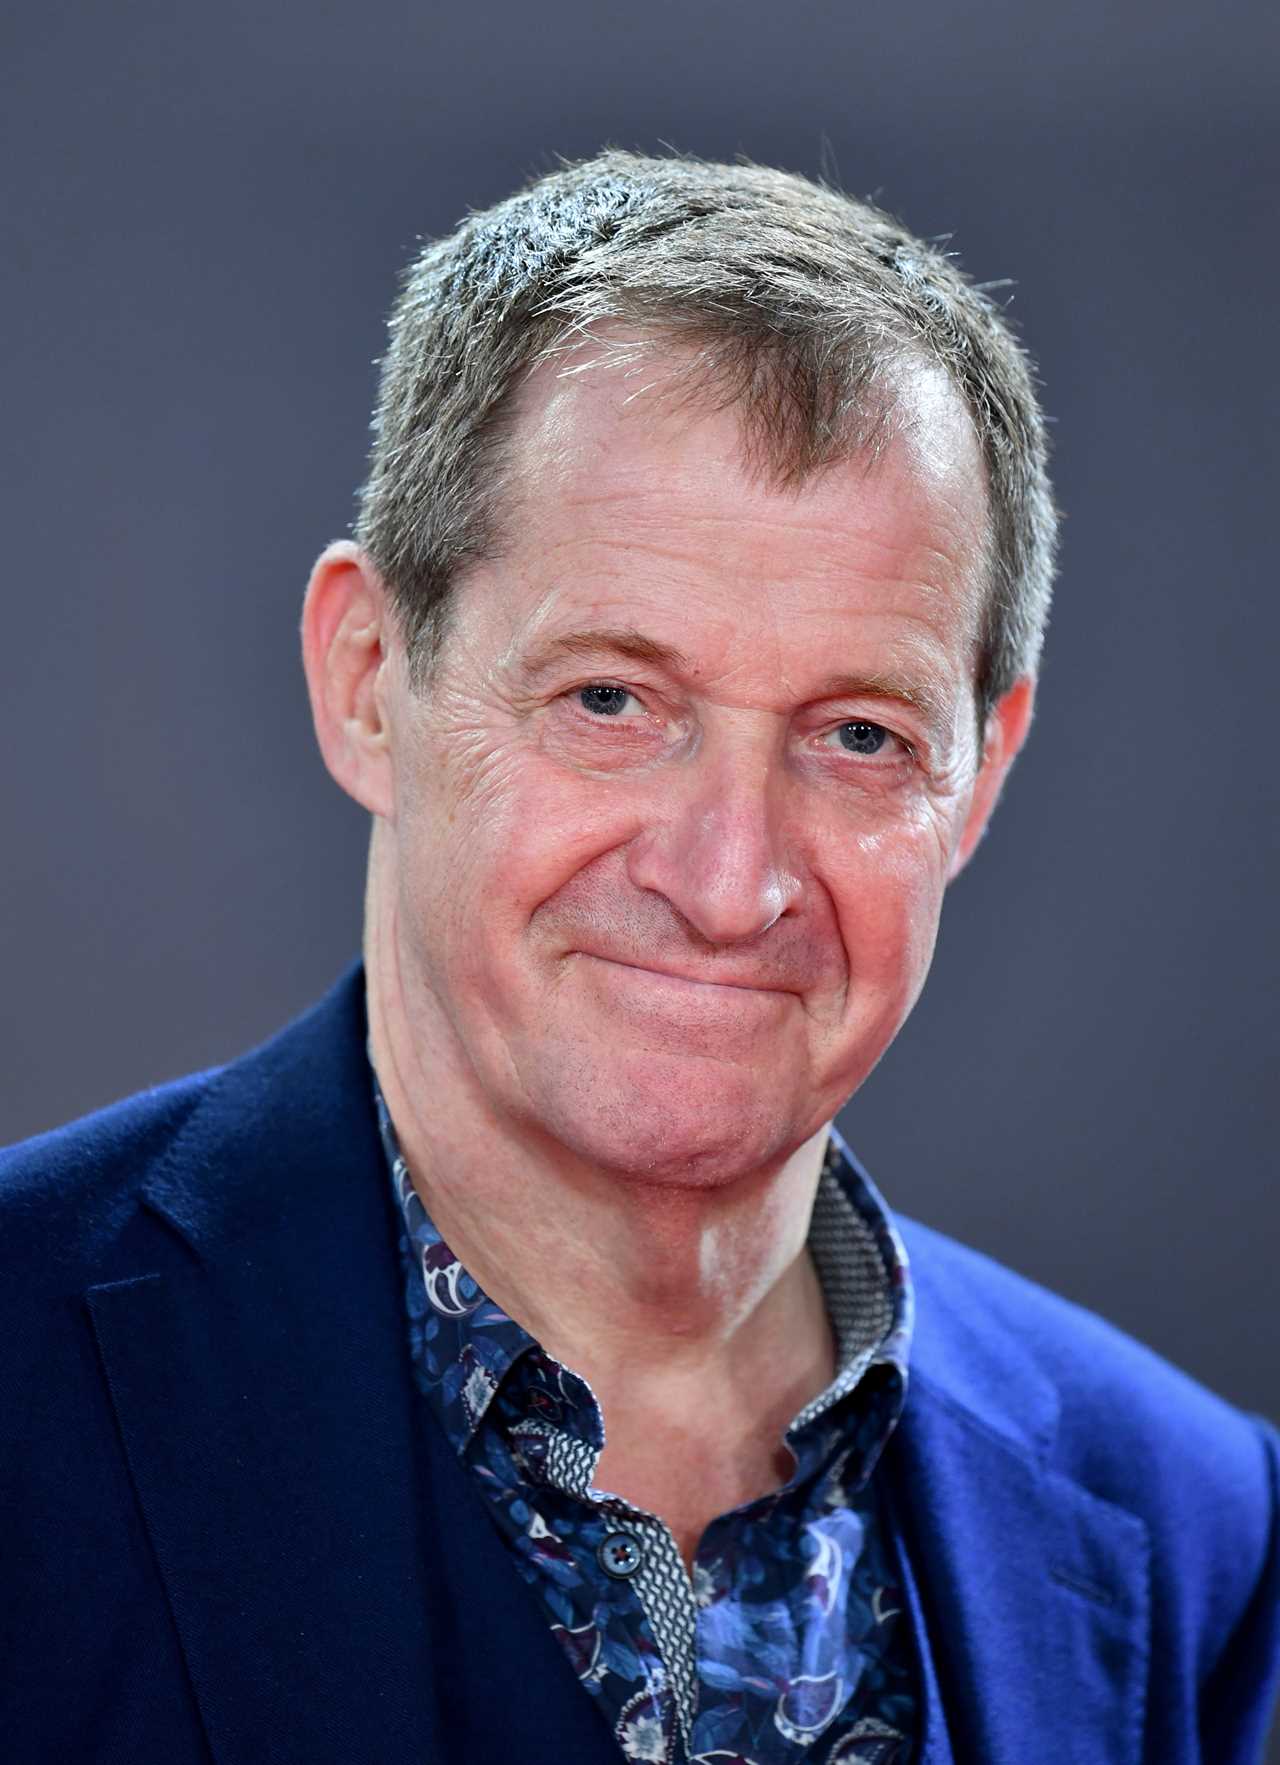 I grilled Sue Gray over Partygate to try to get information, says ex-Labour spin doctor Alastair Campbell